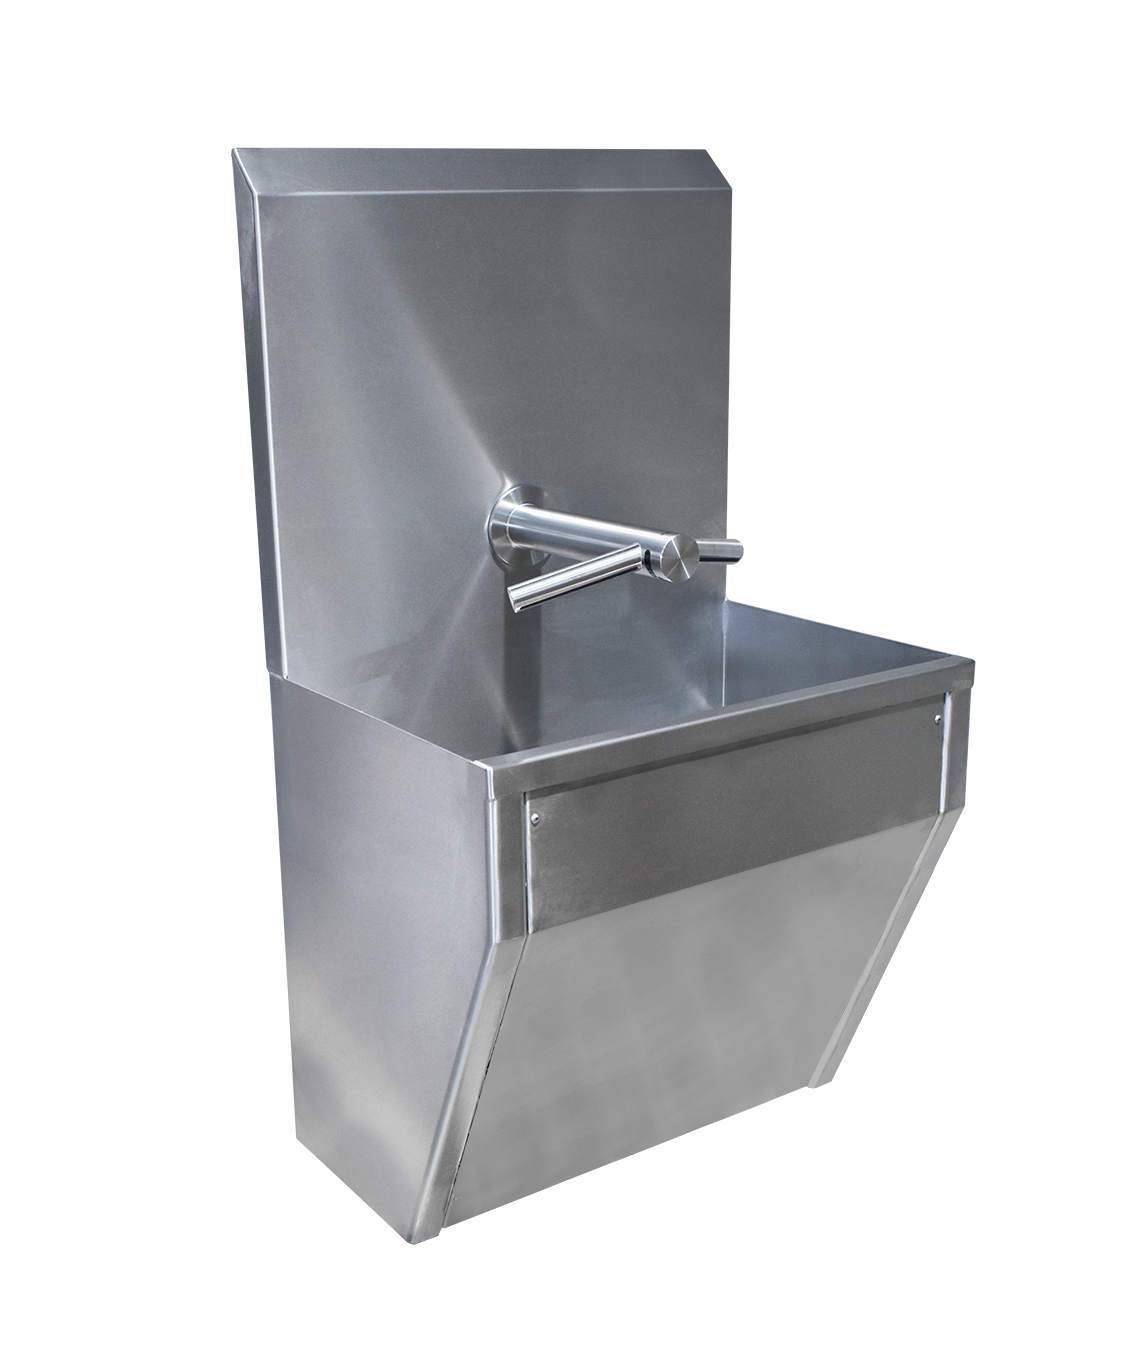 Stainless steel one station wash trough with Dyson Airblade wash + dry tap